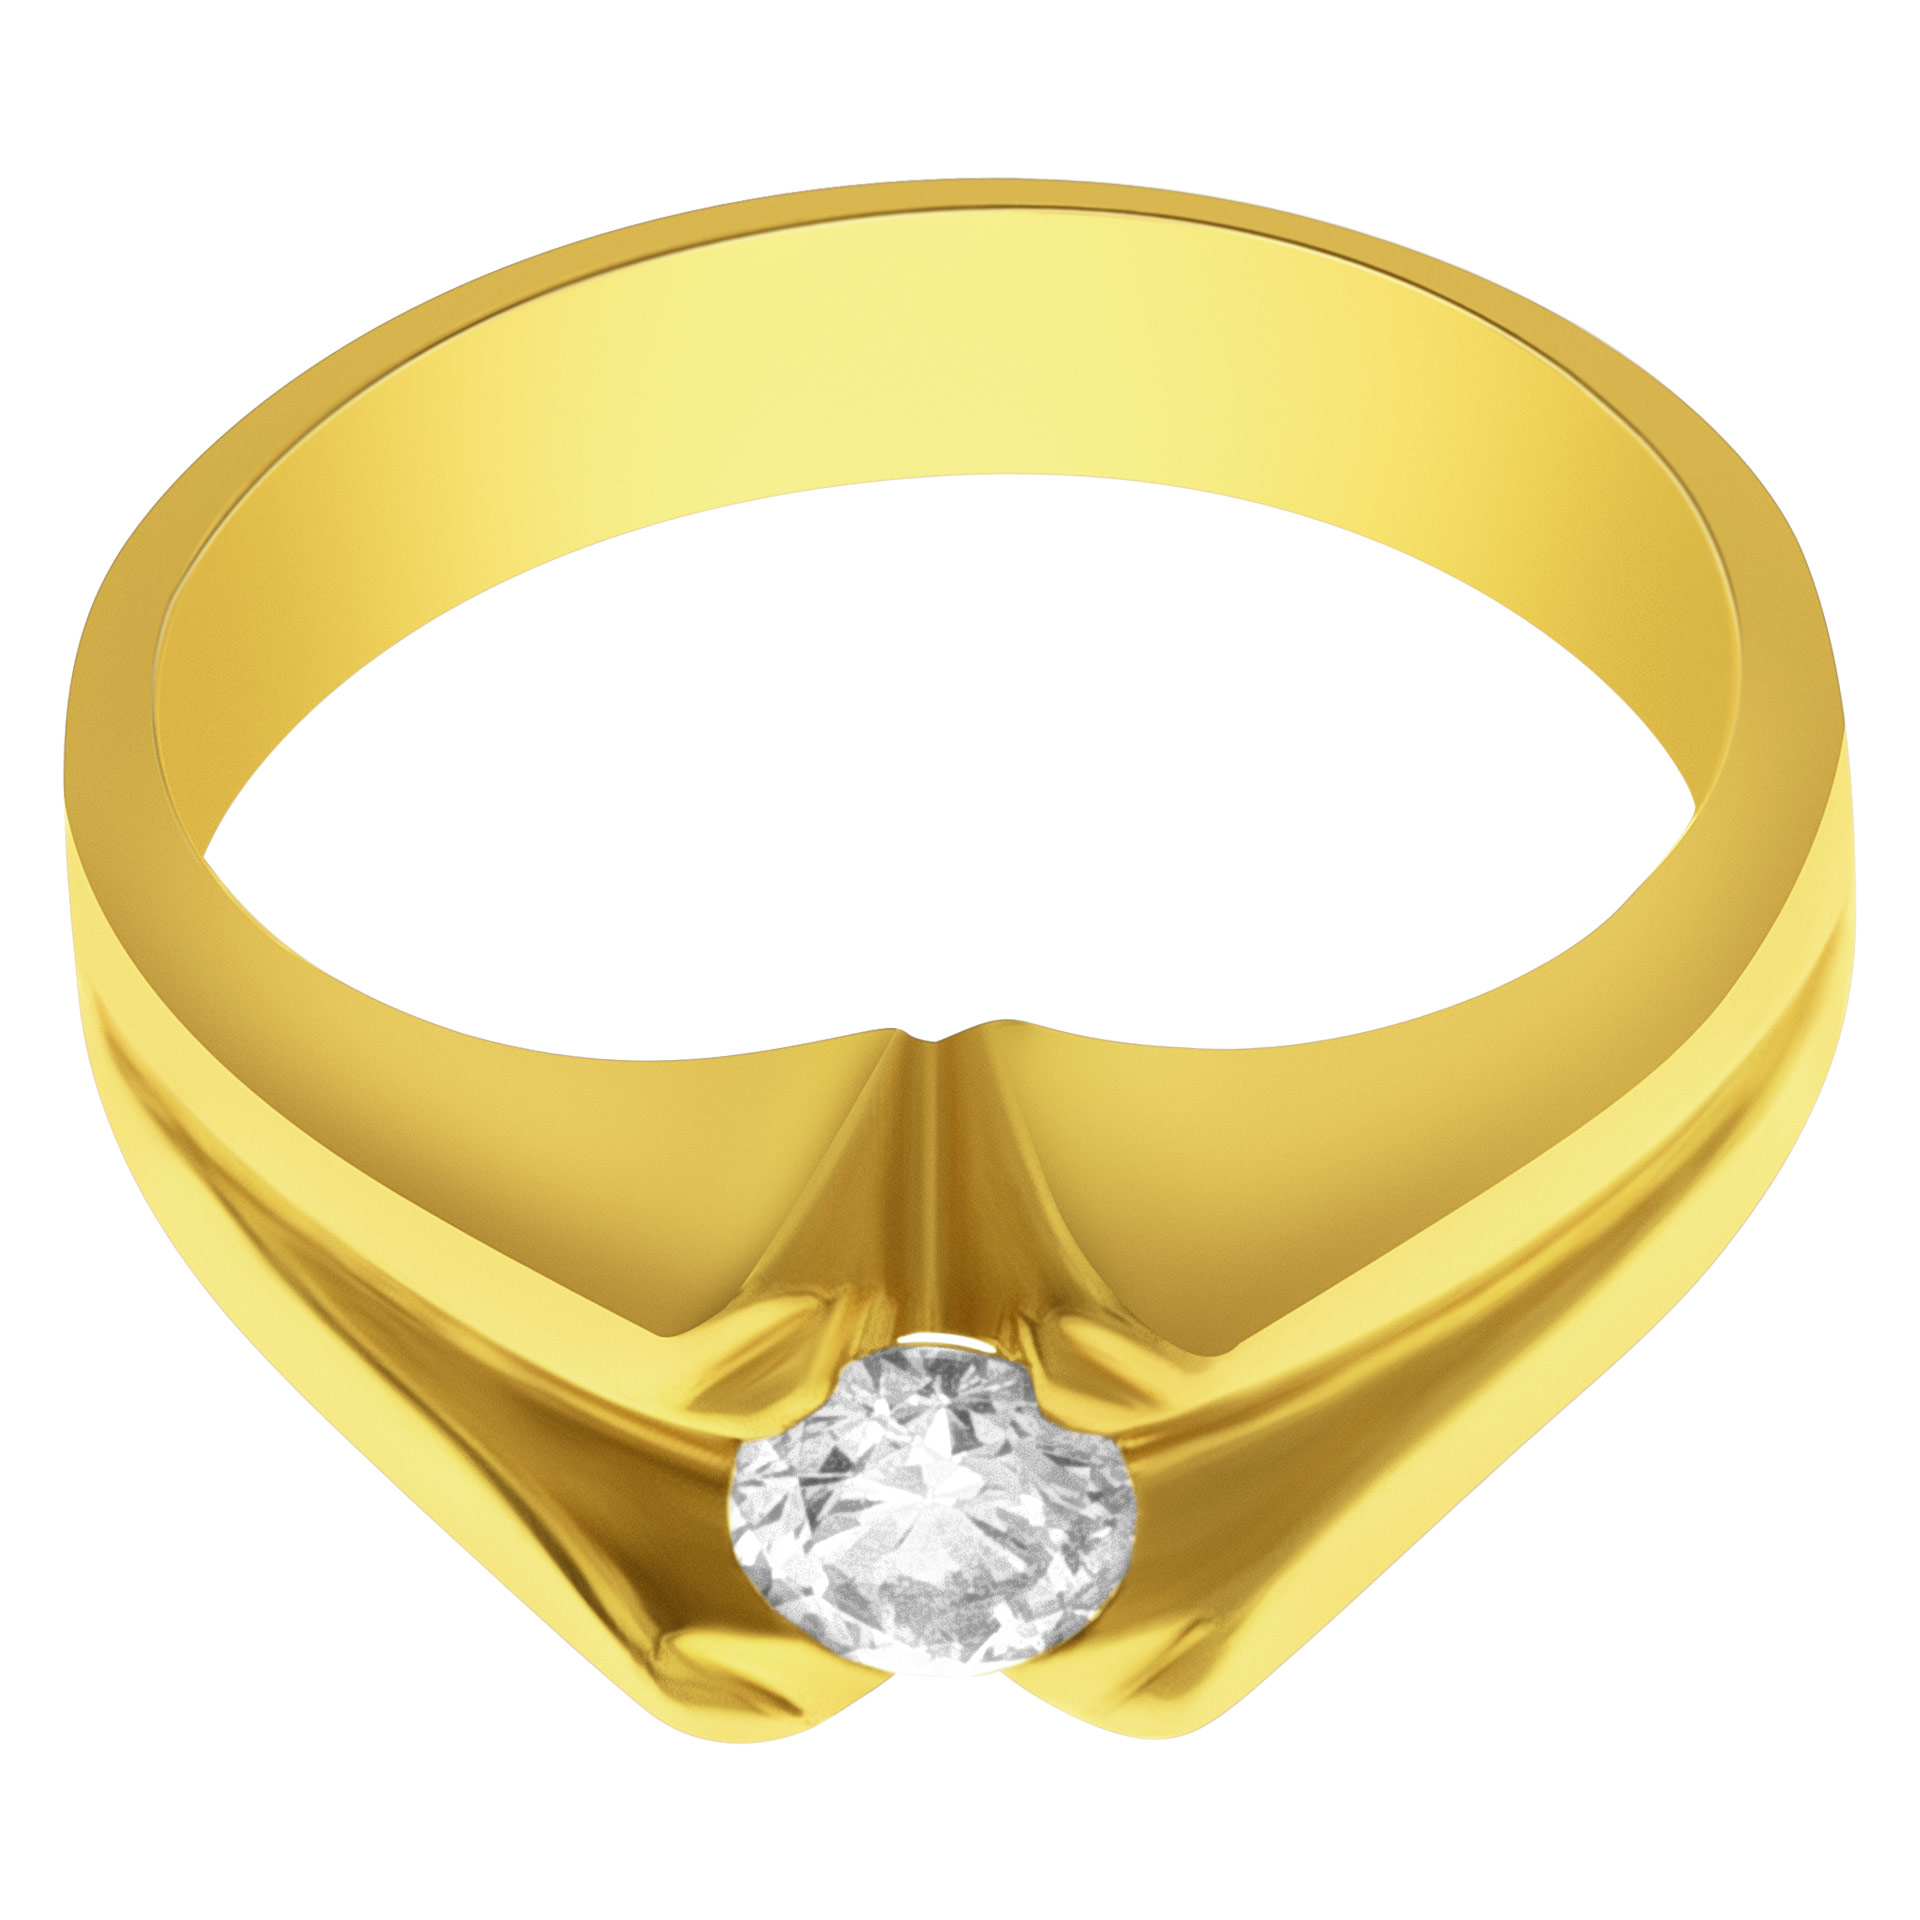 Gents solitare diamong ring in 18k yellow gold. 0.45 carat diamond. Size 10.5 image 1